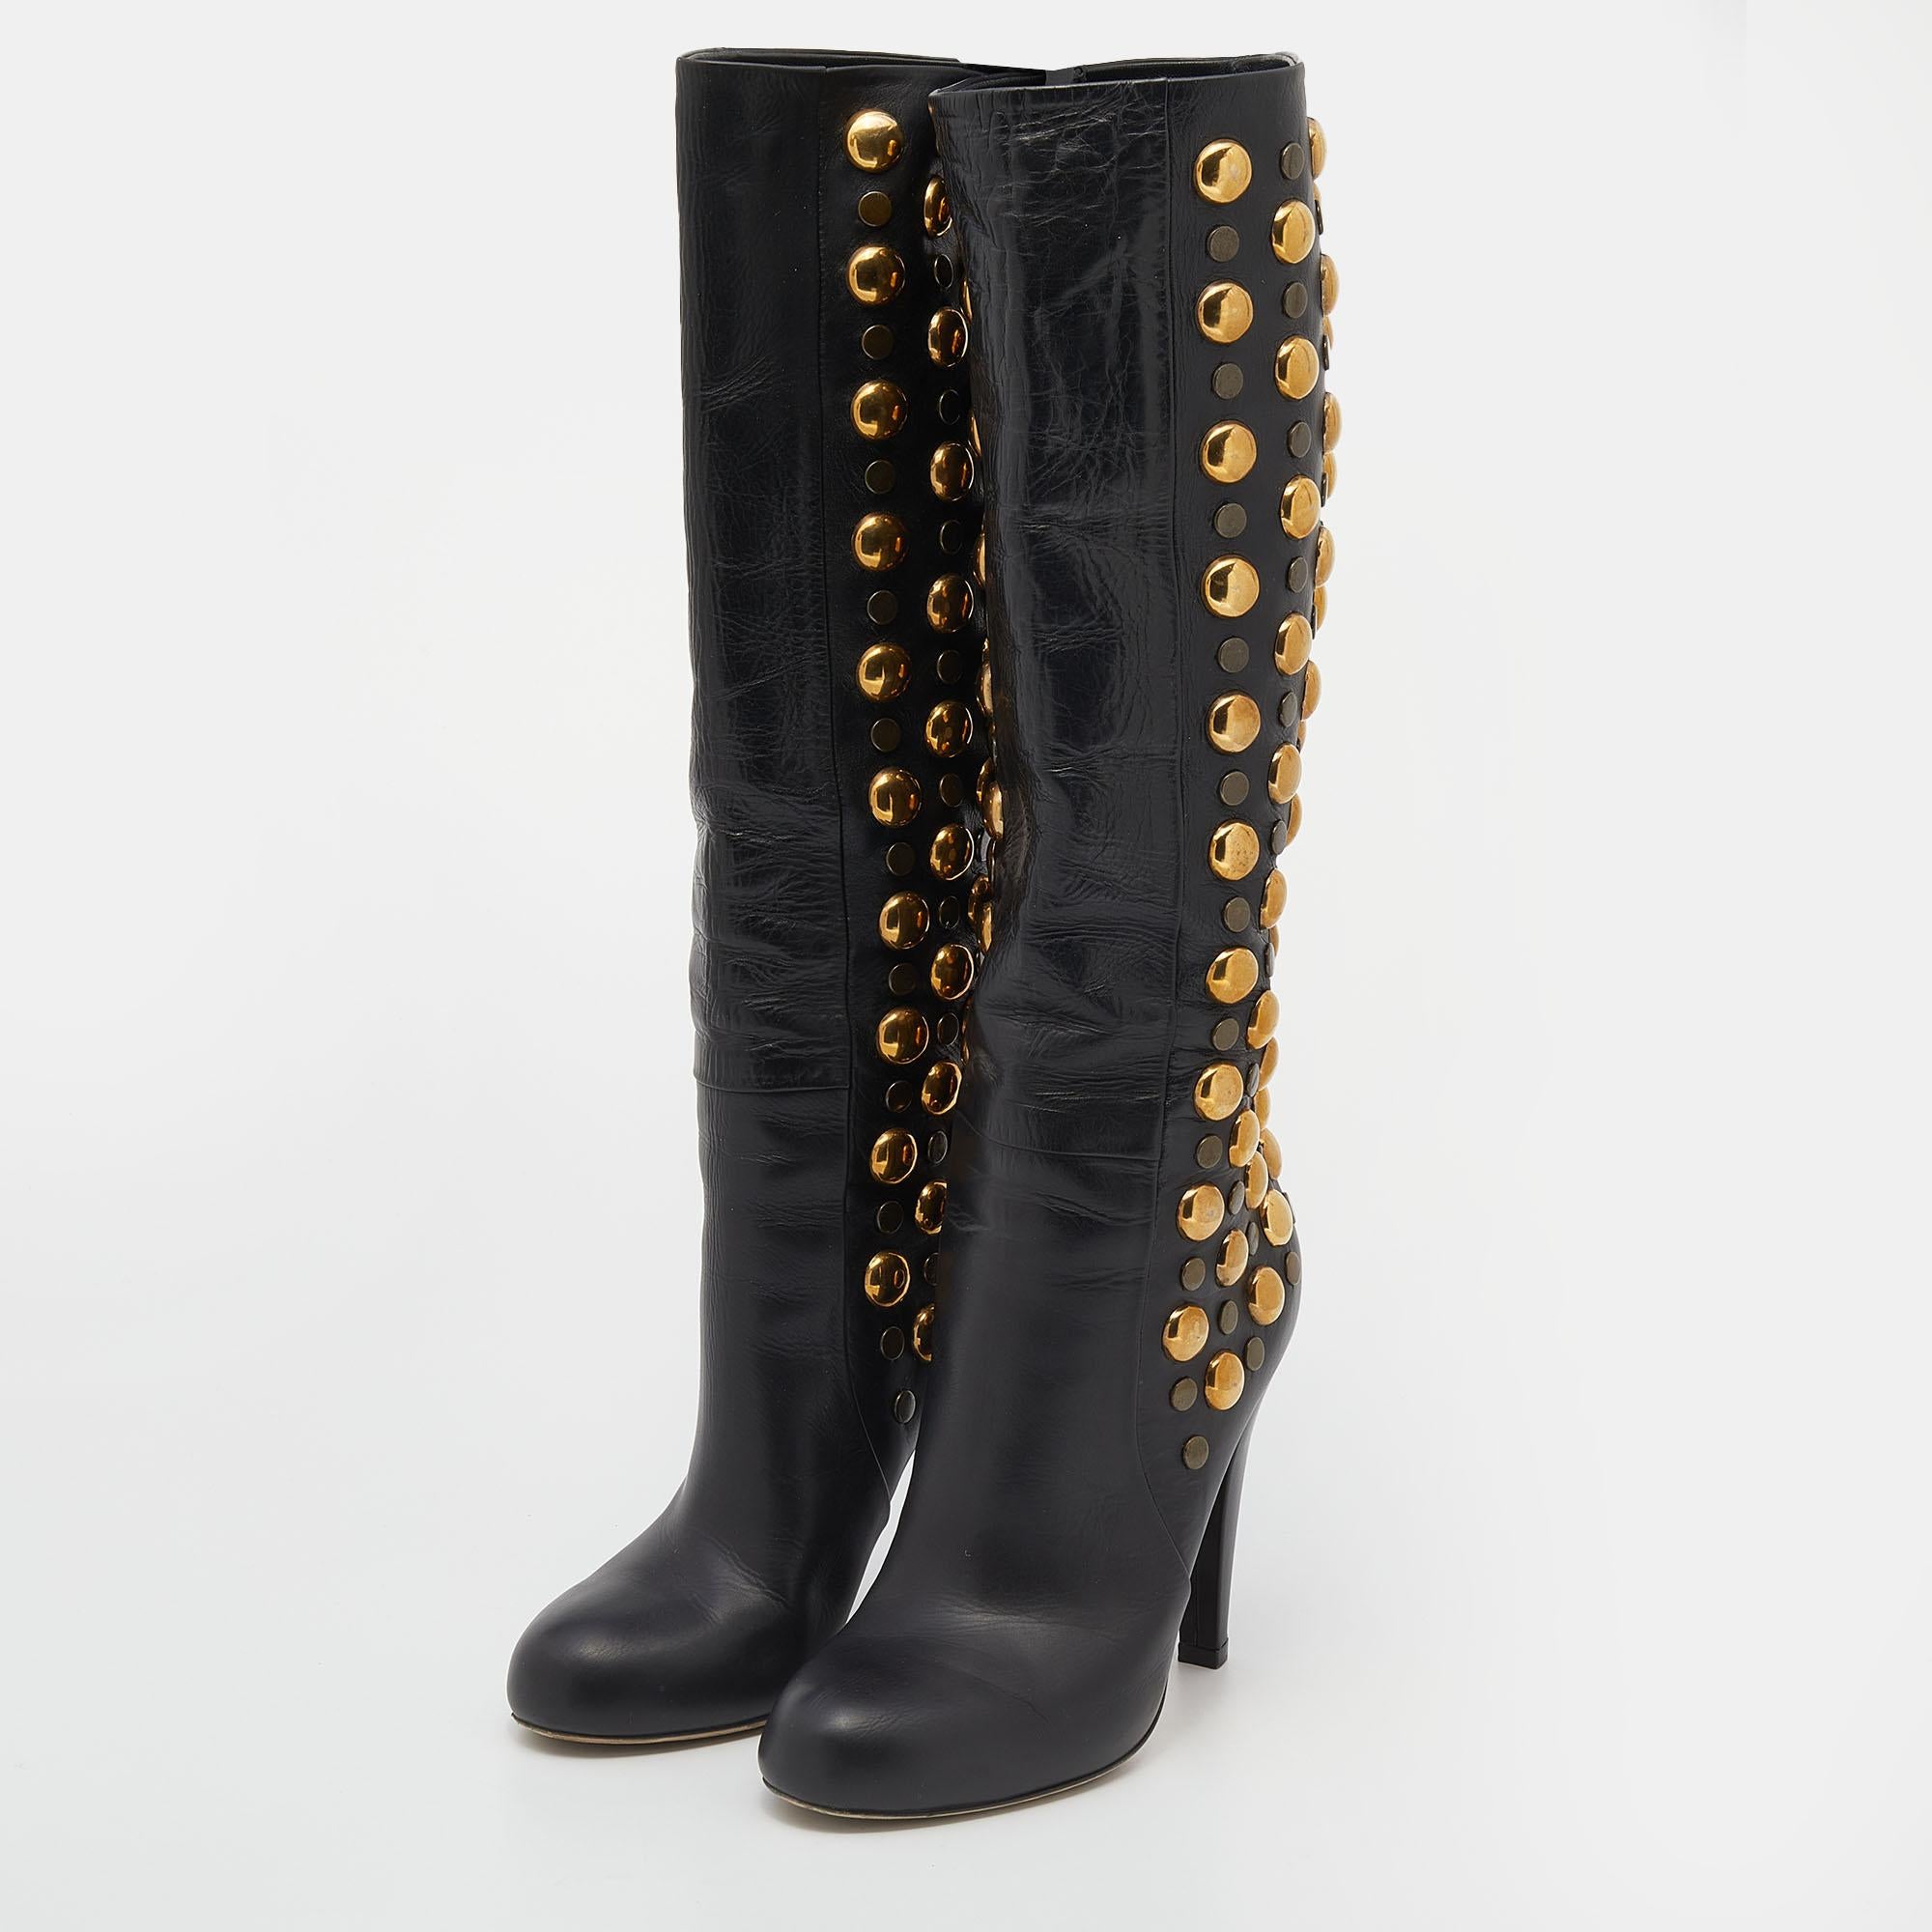 Women's Gucci Black Leather Babouska Studded Mid Calf Length Boots Size 36